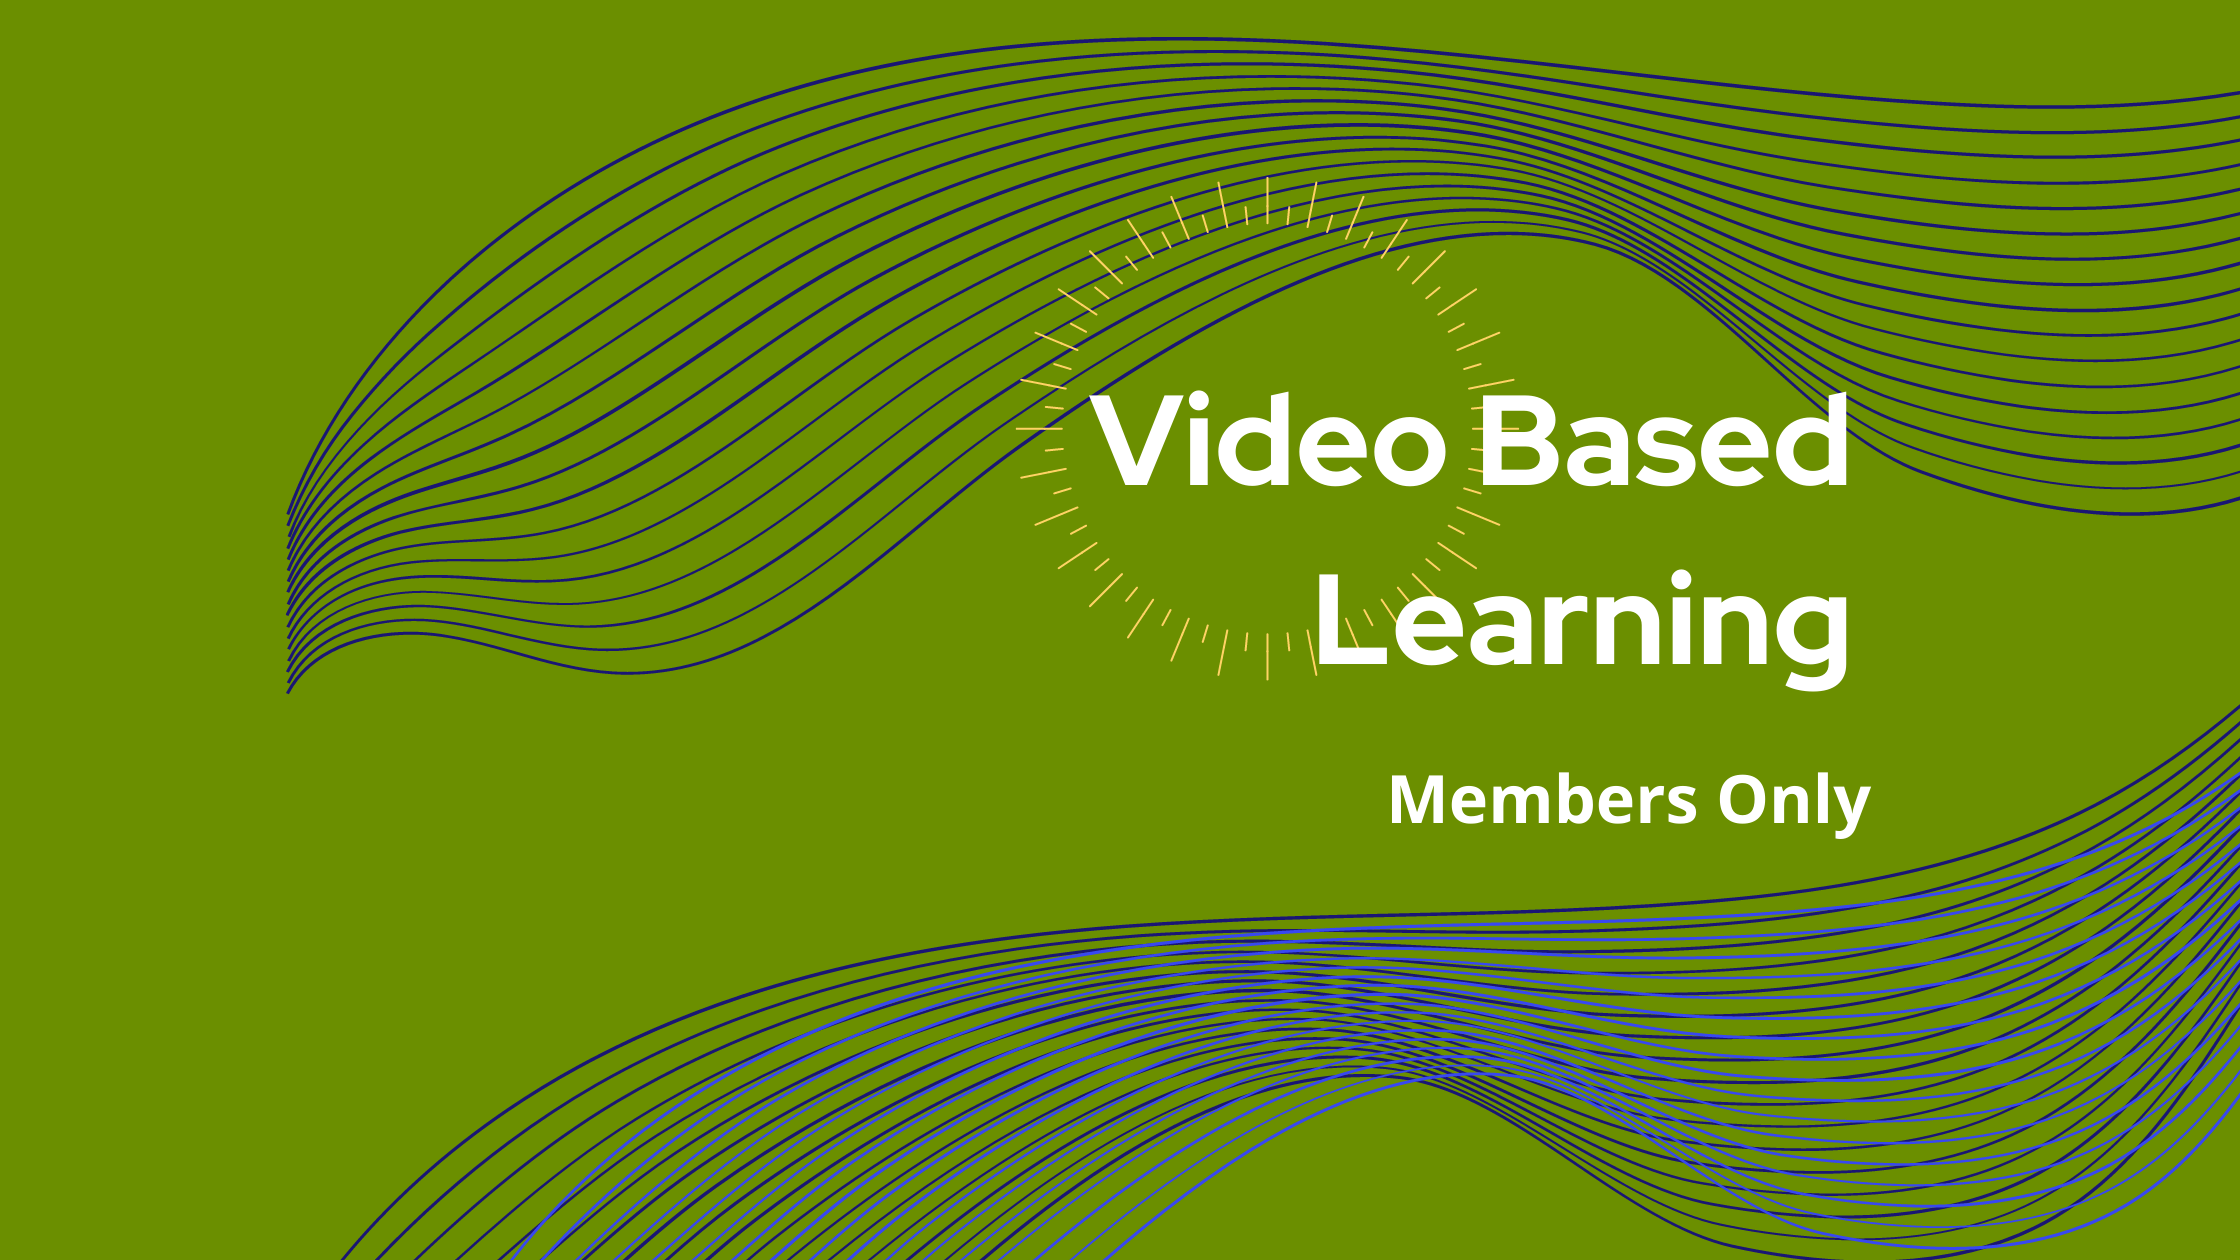 Video Based Learning